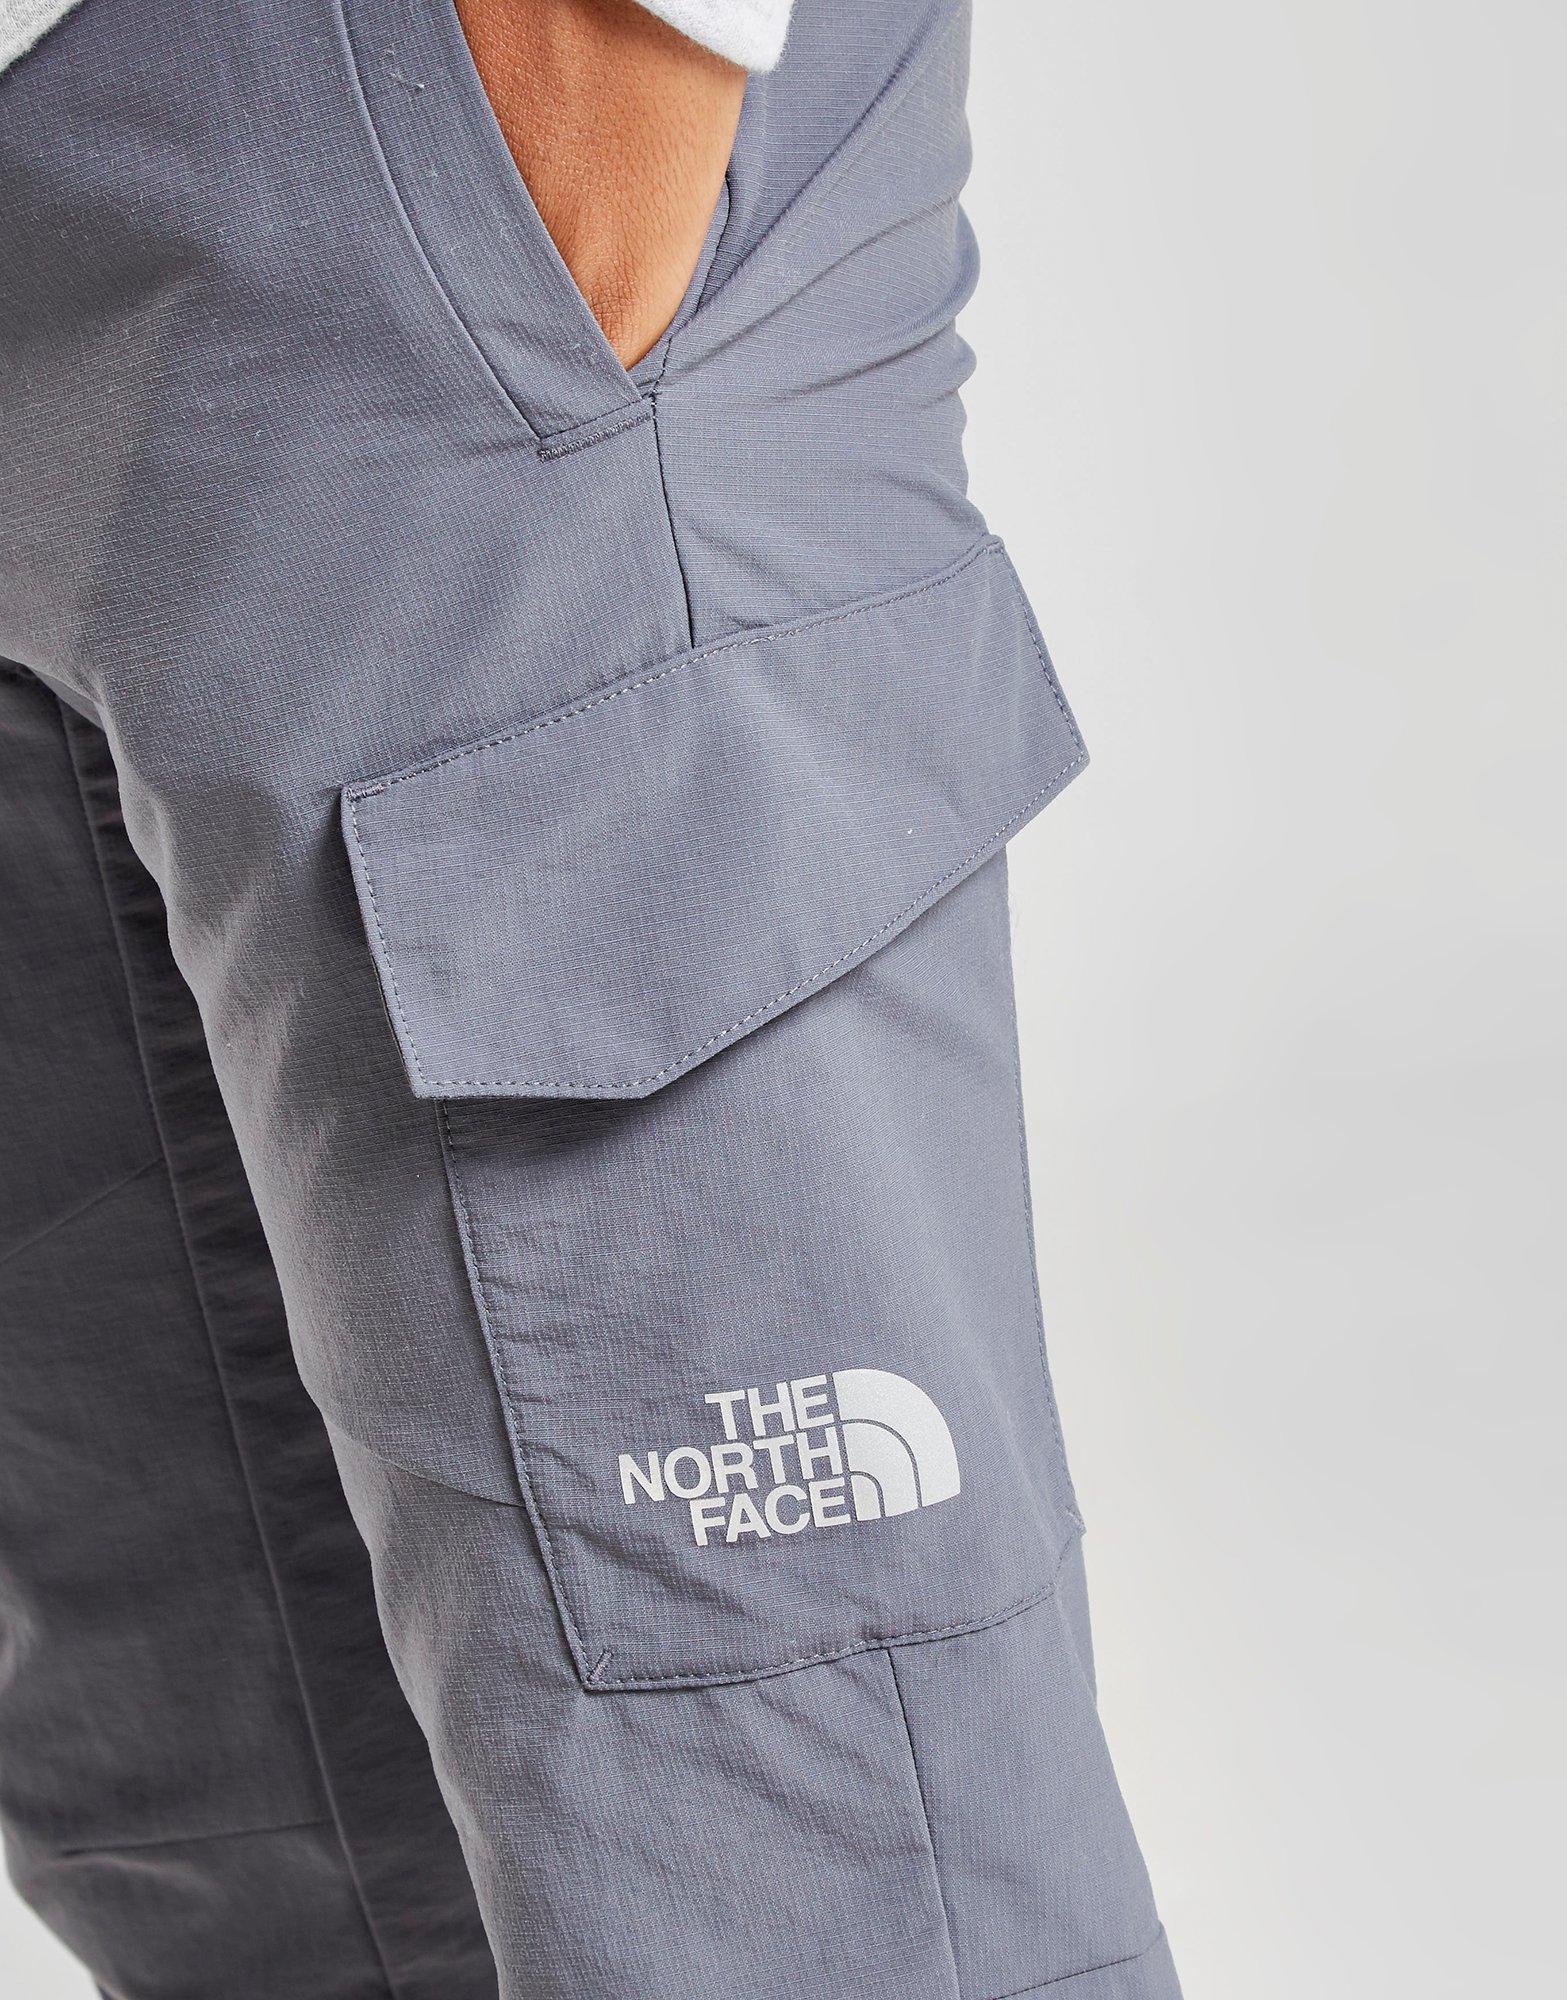 north face green cargo pants